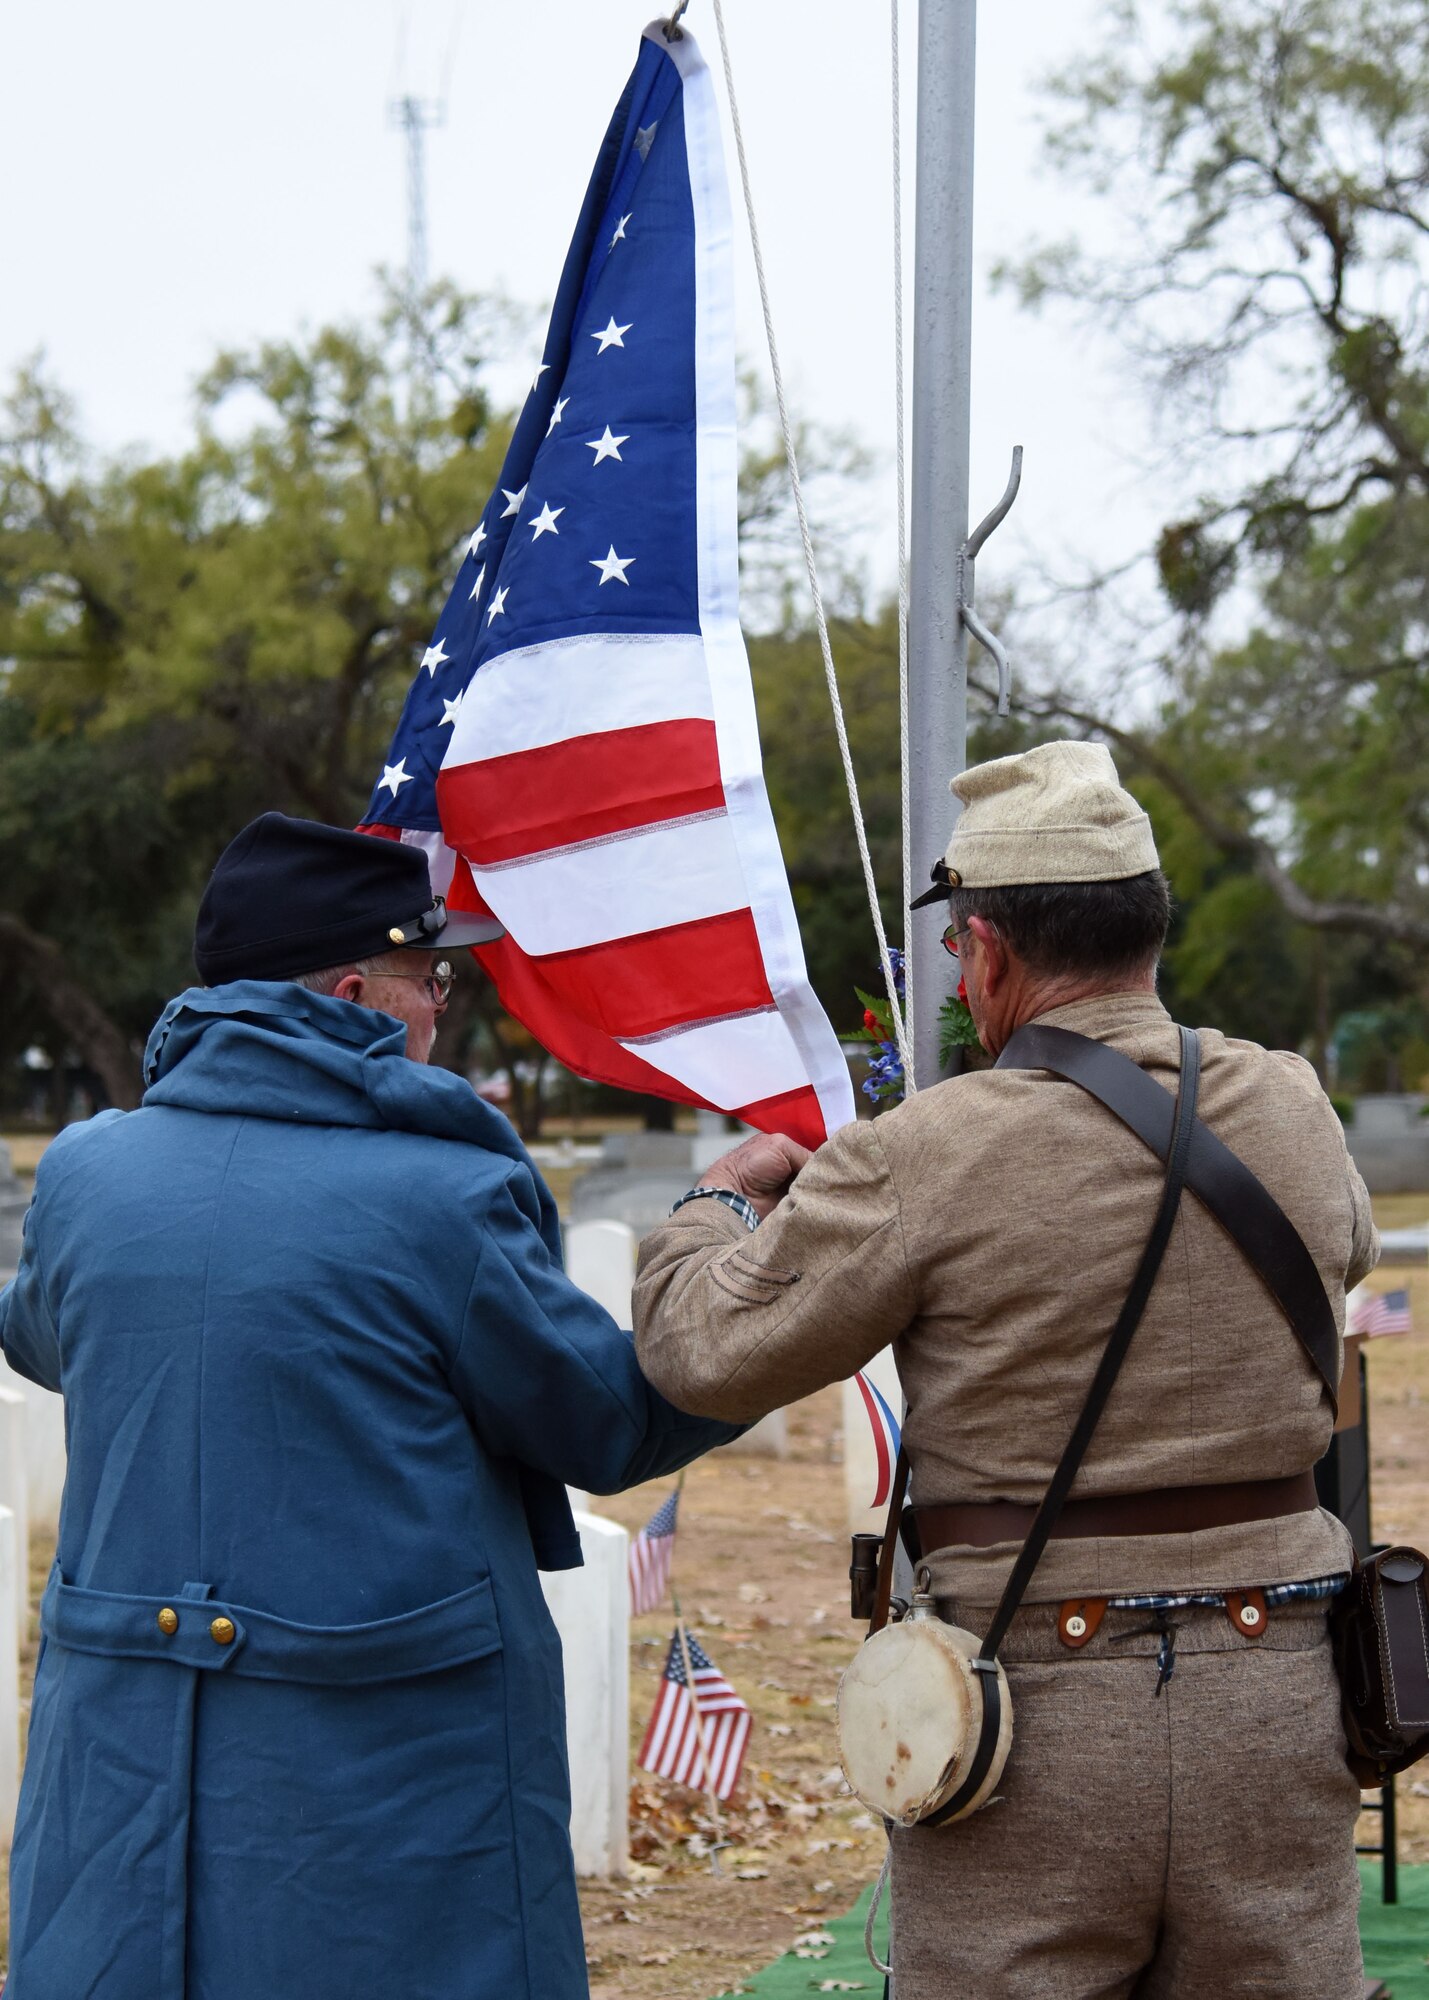 Members of the Tom Green County Historical Commission raise the flag in honor of Veterans Day at the Fairmount Cemetery in San Angelo, Texas, Nov. 11, 2019. The Friends of Fairmount organization invited the city to honor those who have served. (U.S. Air Force Photo by Airman 1st Class Ethan Sherwood/Released)